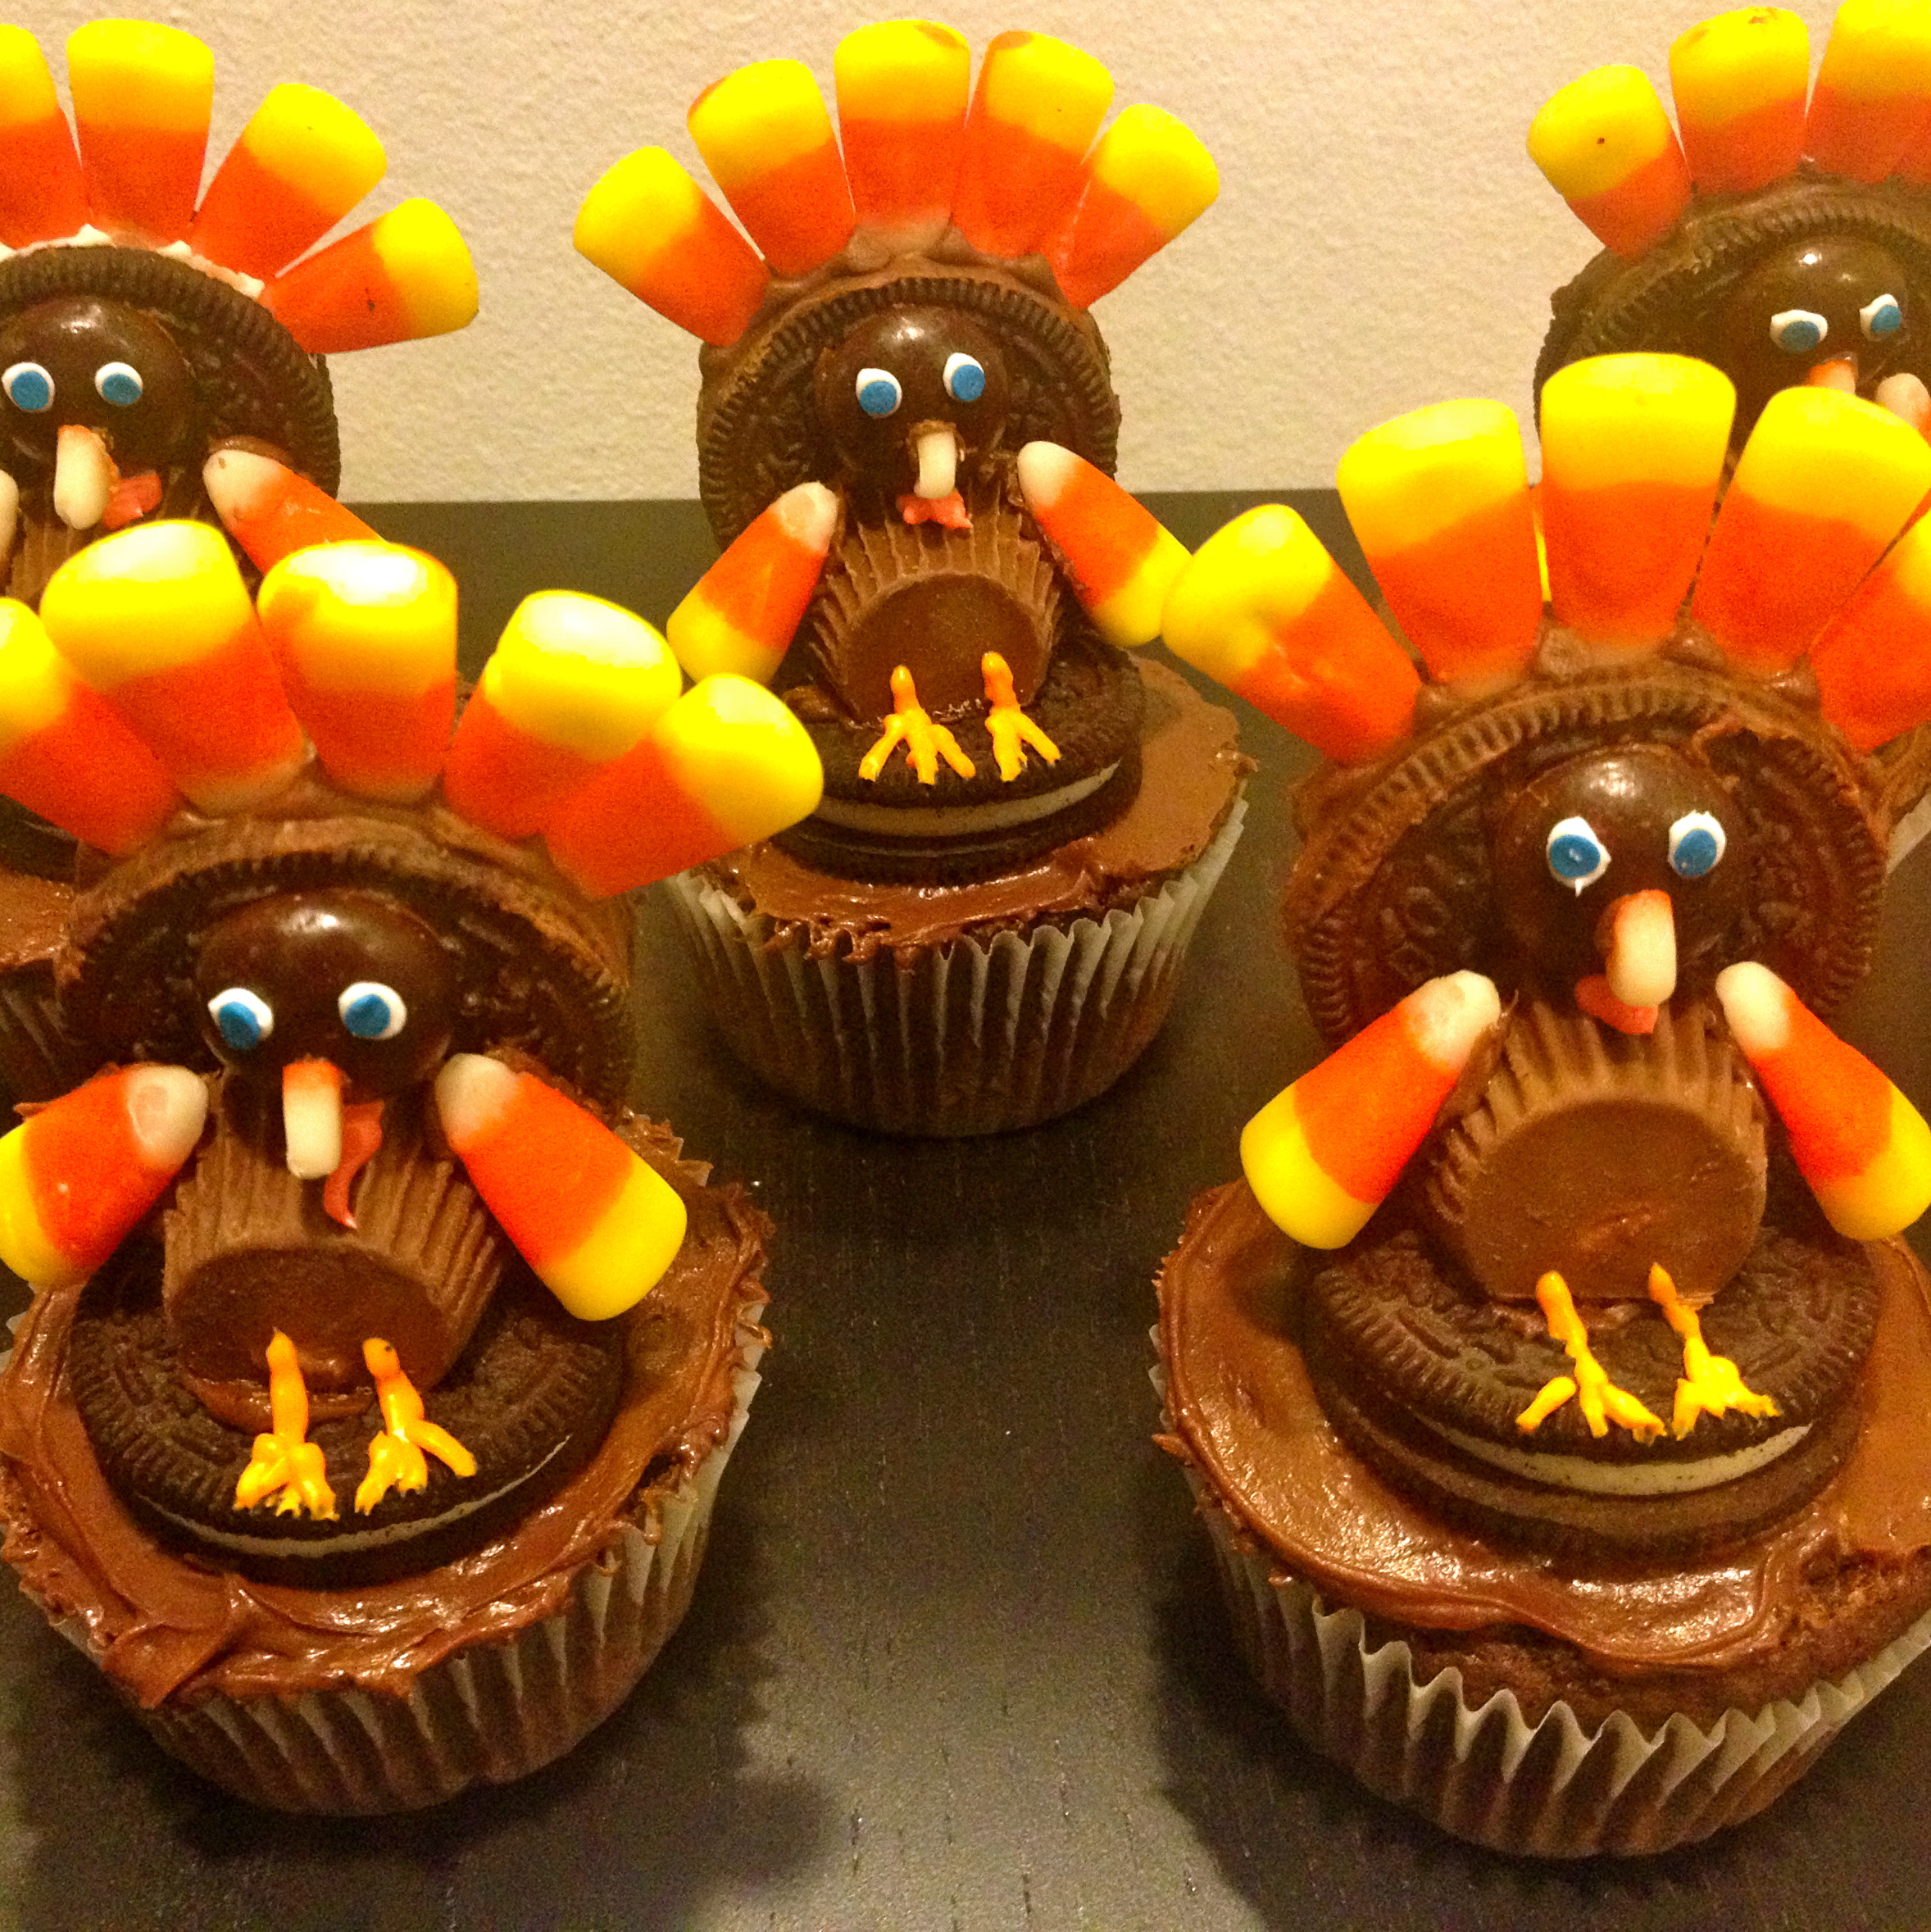 Turkey Cupcakes with Candy Corn